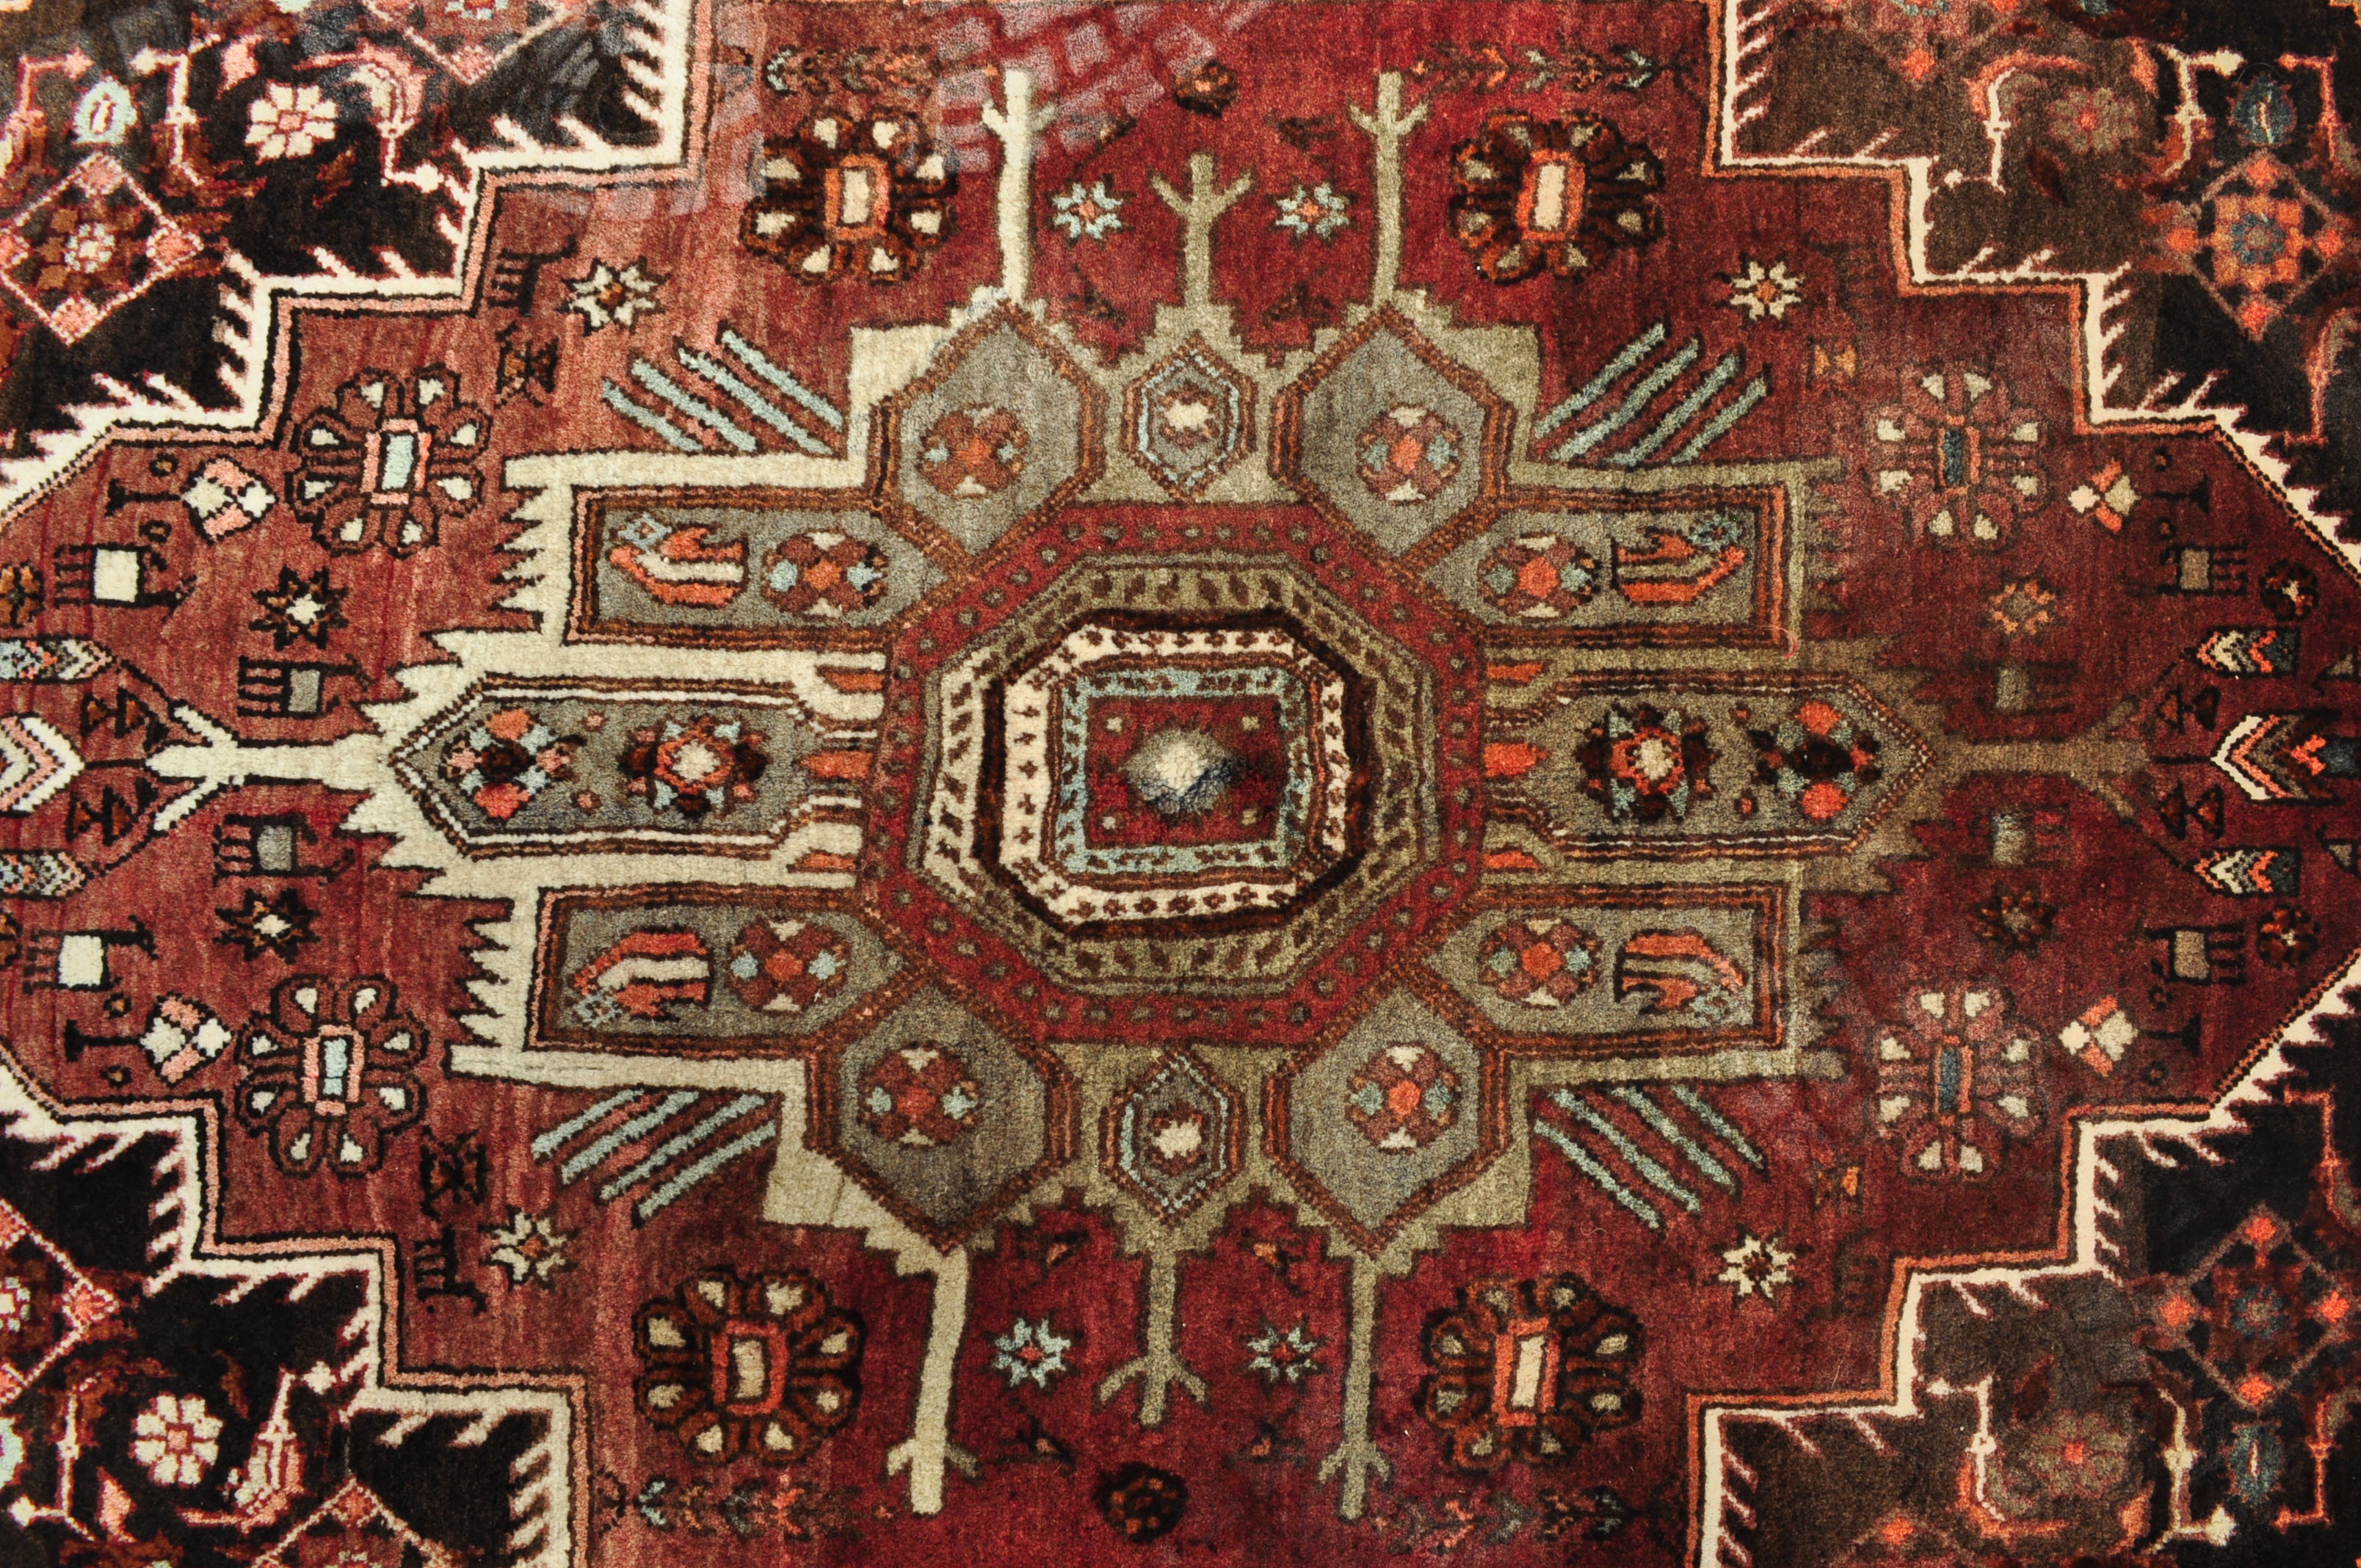 MID 20TH CENTURY PERSIAN ISLAMIC THICK PILE RUG - Image 4 of 6